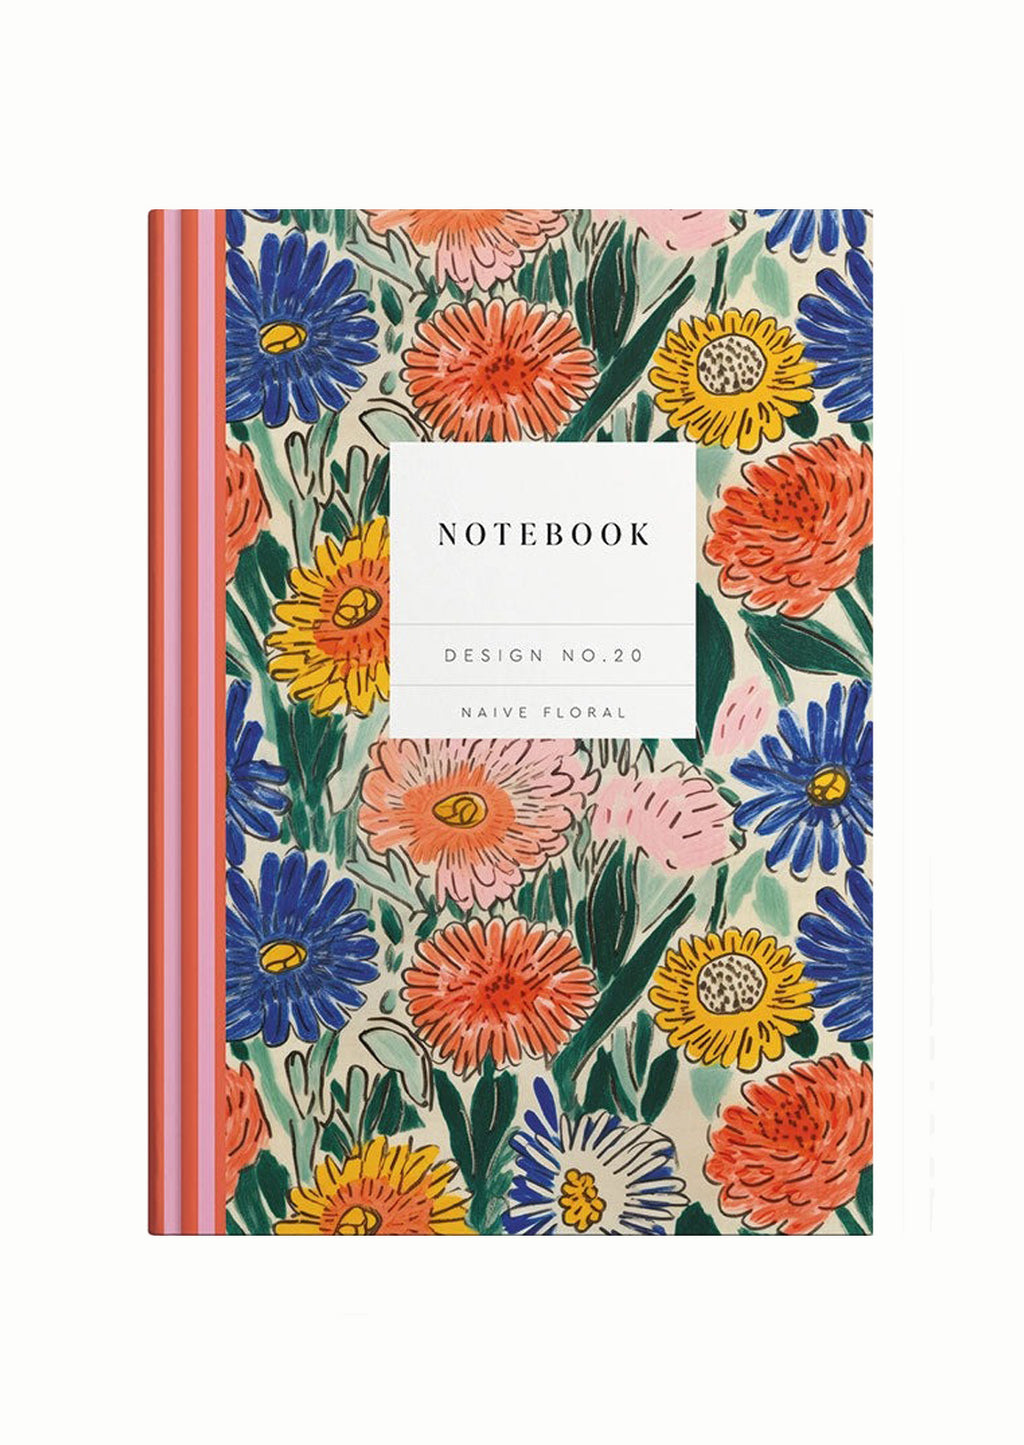 Naive Floral: A hardcover notebook with striped spine and floral print cover.